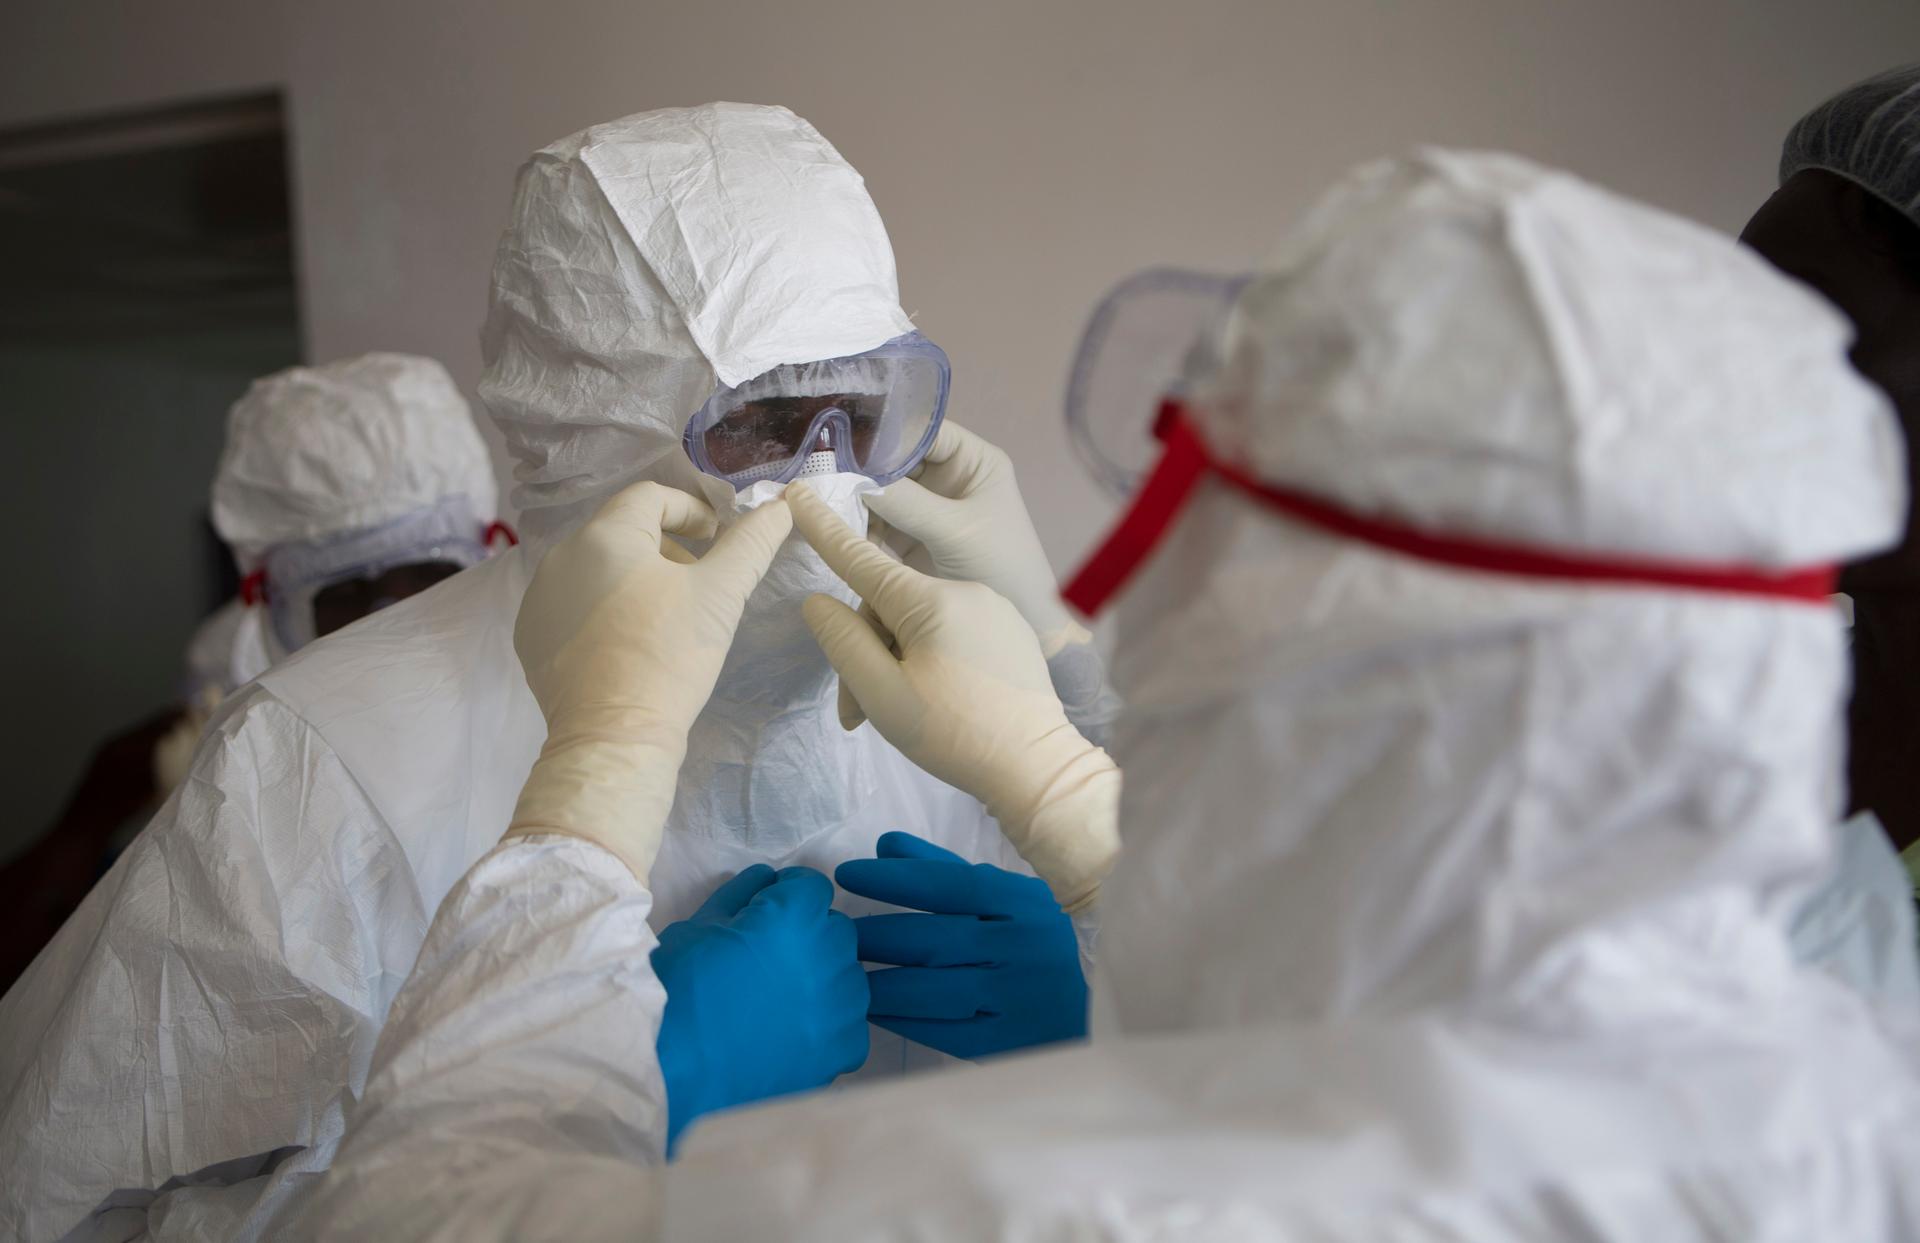 Health workers wearing protective equipment are pictured at the Island Clinic in Monrovia, Liberia on September 30, 2014, where patients are treated for Ebola. 